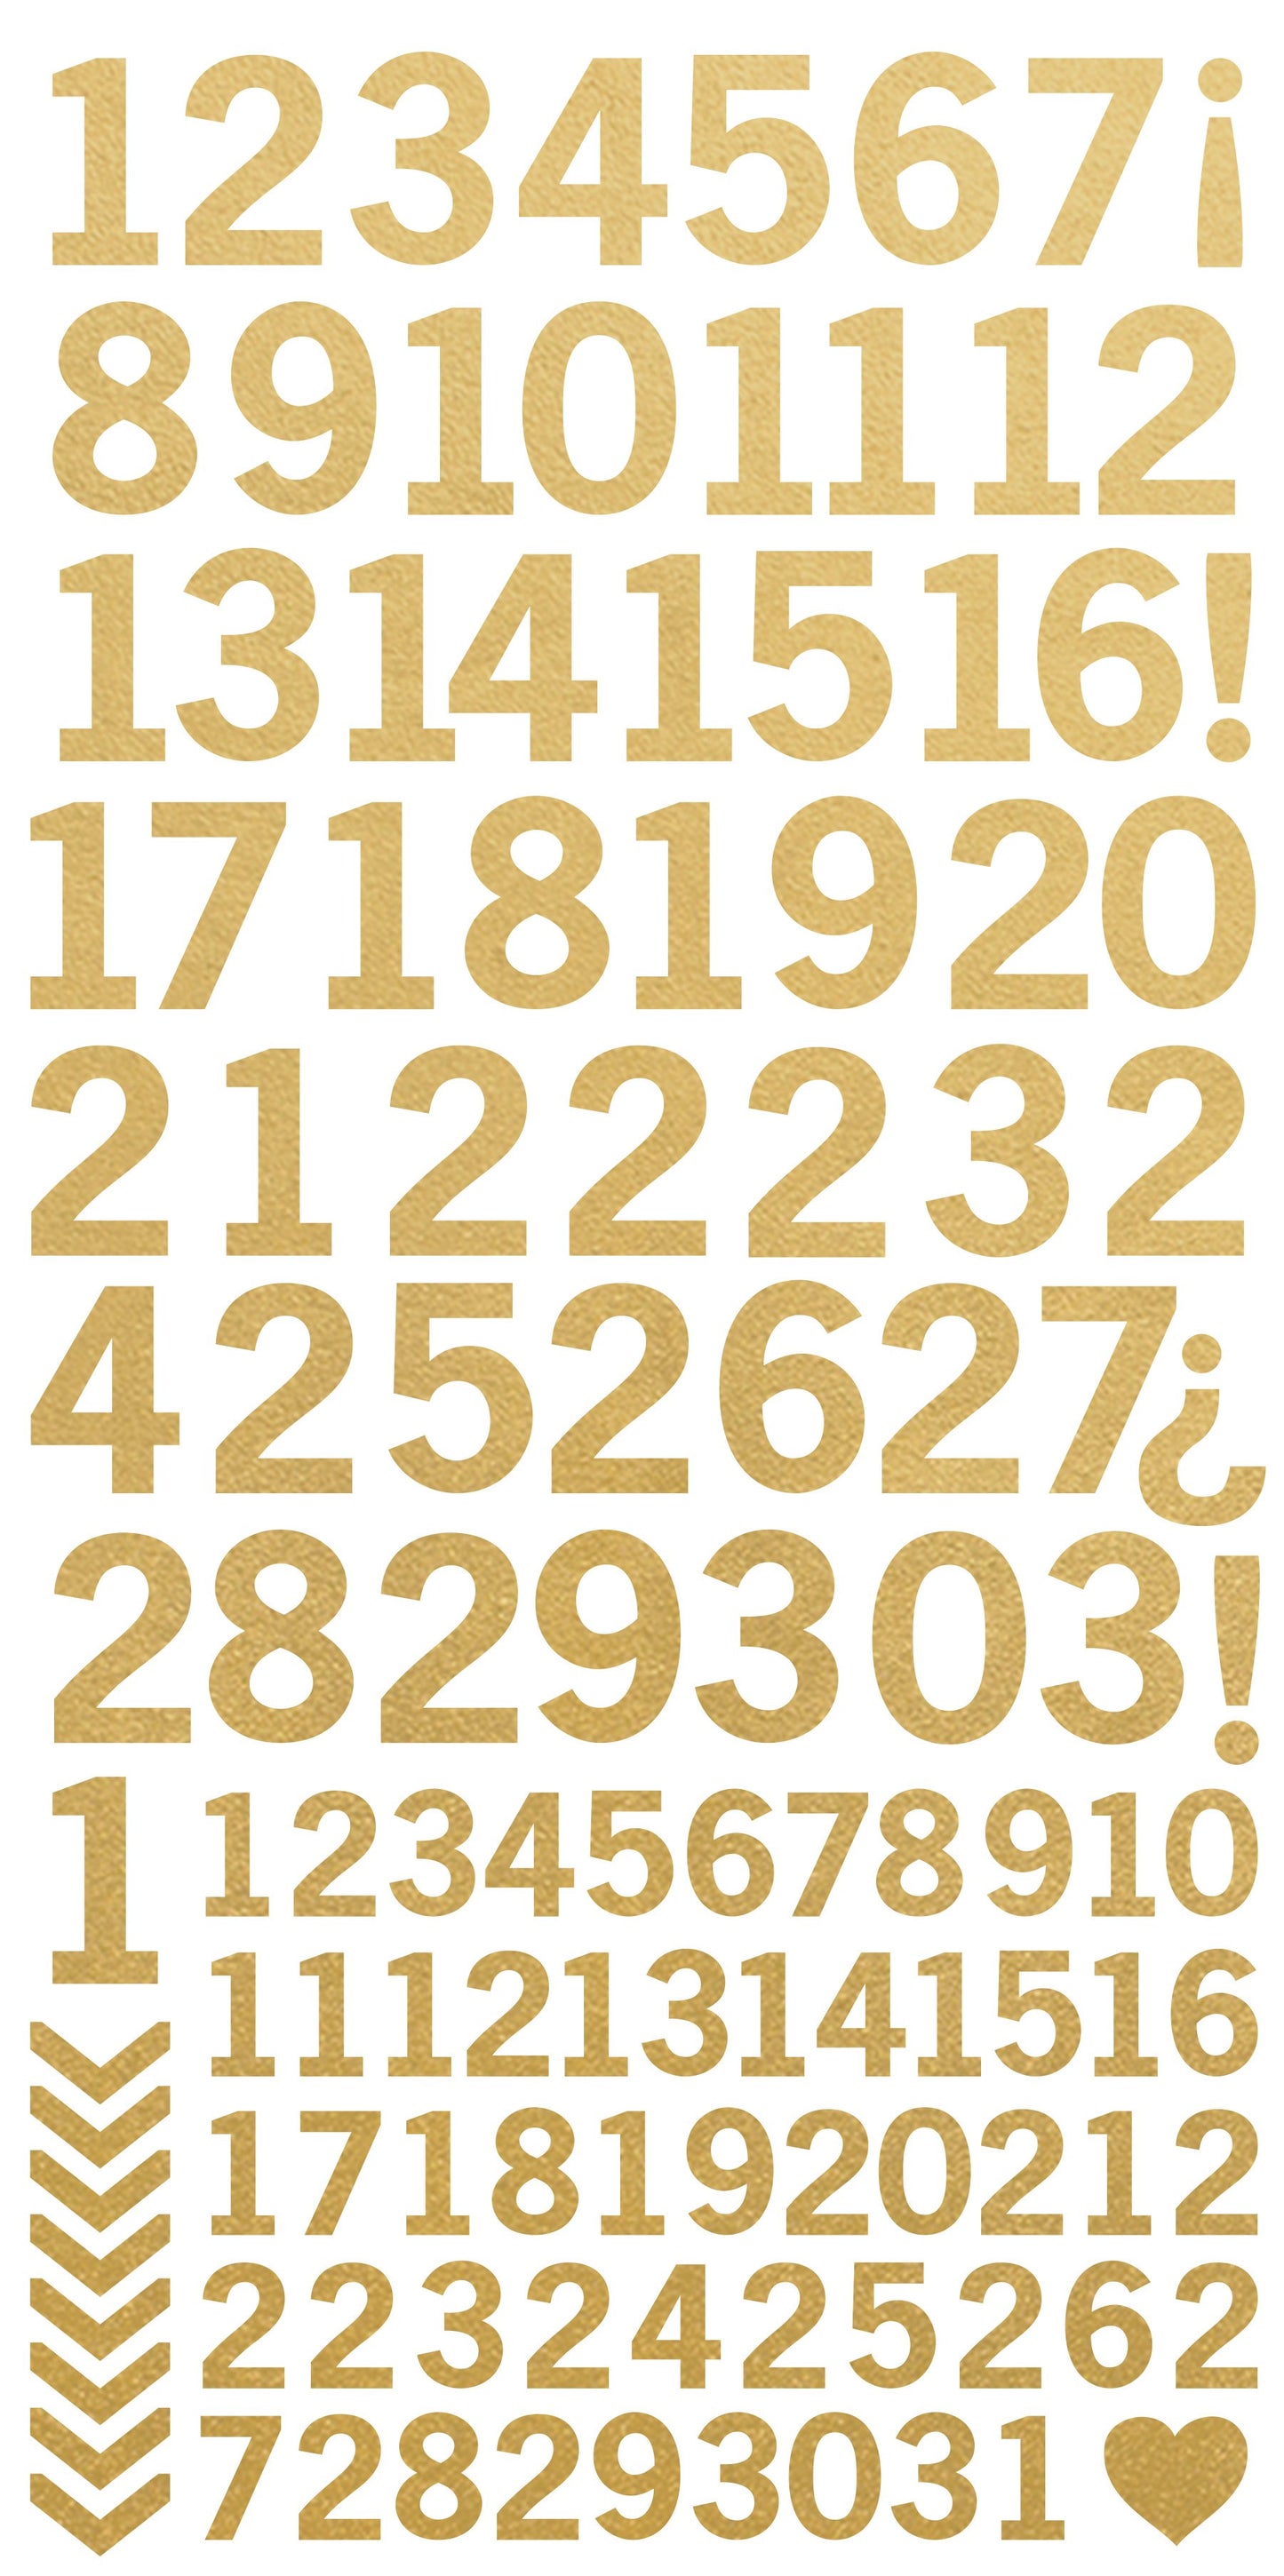 Number Stickers - Metallic Gold